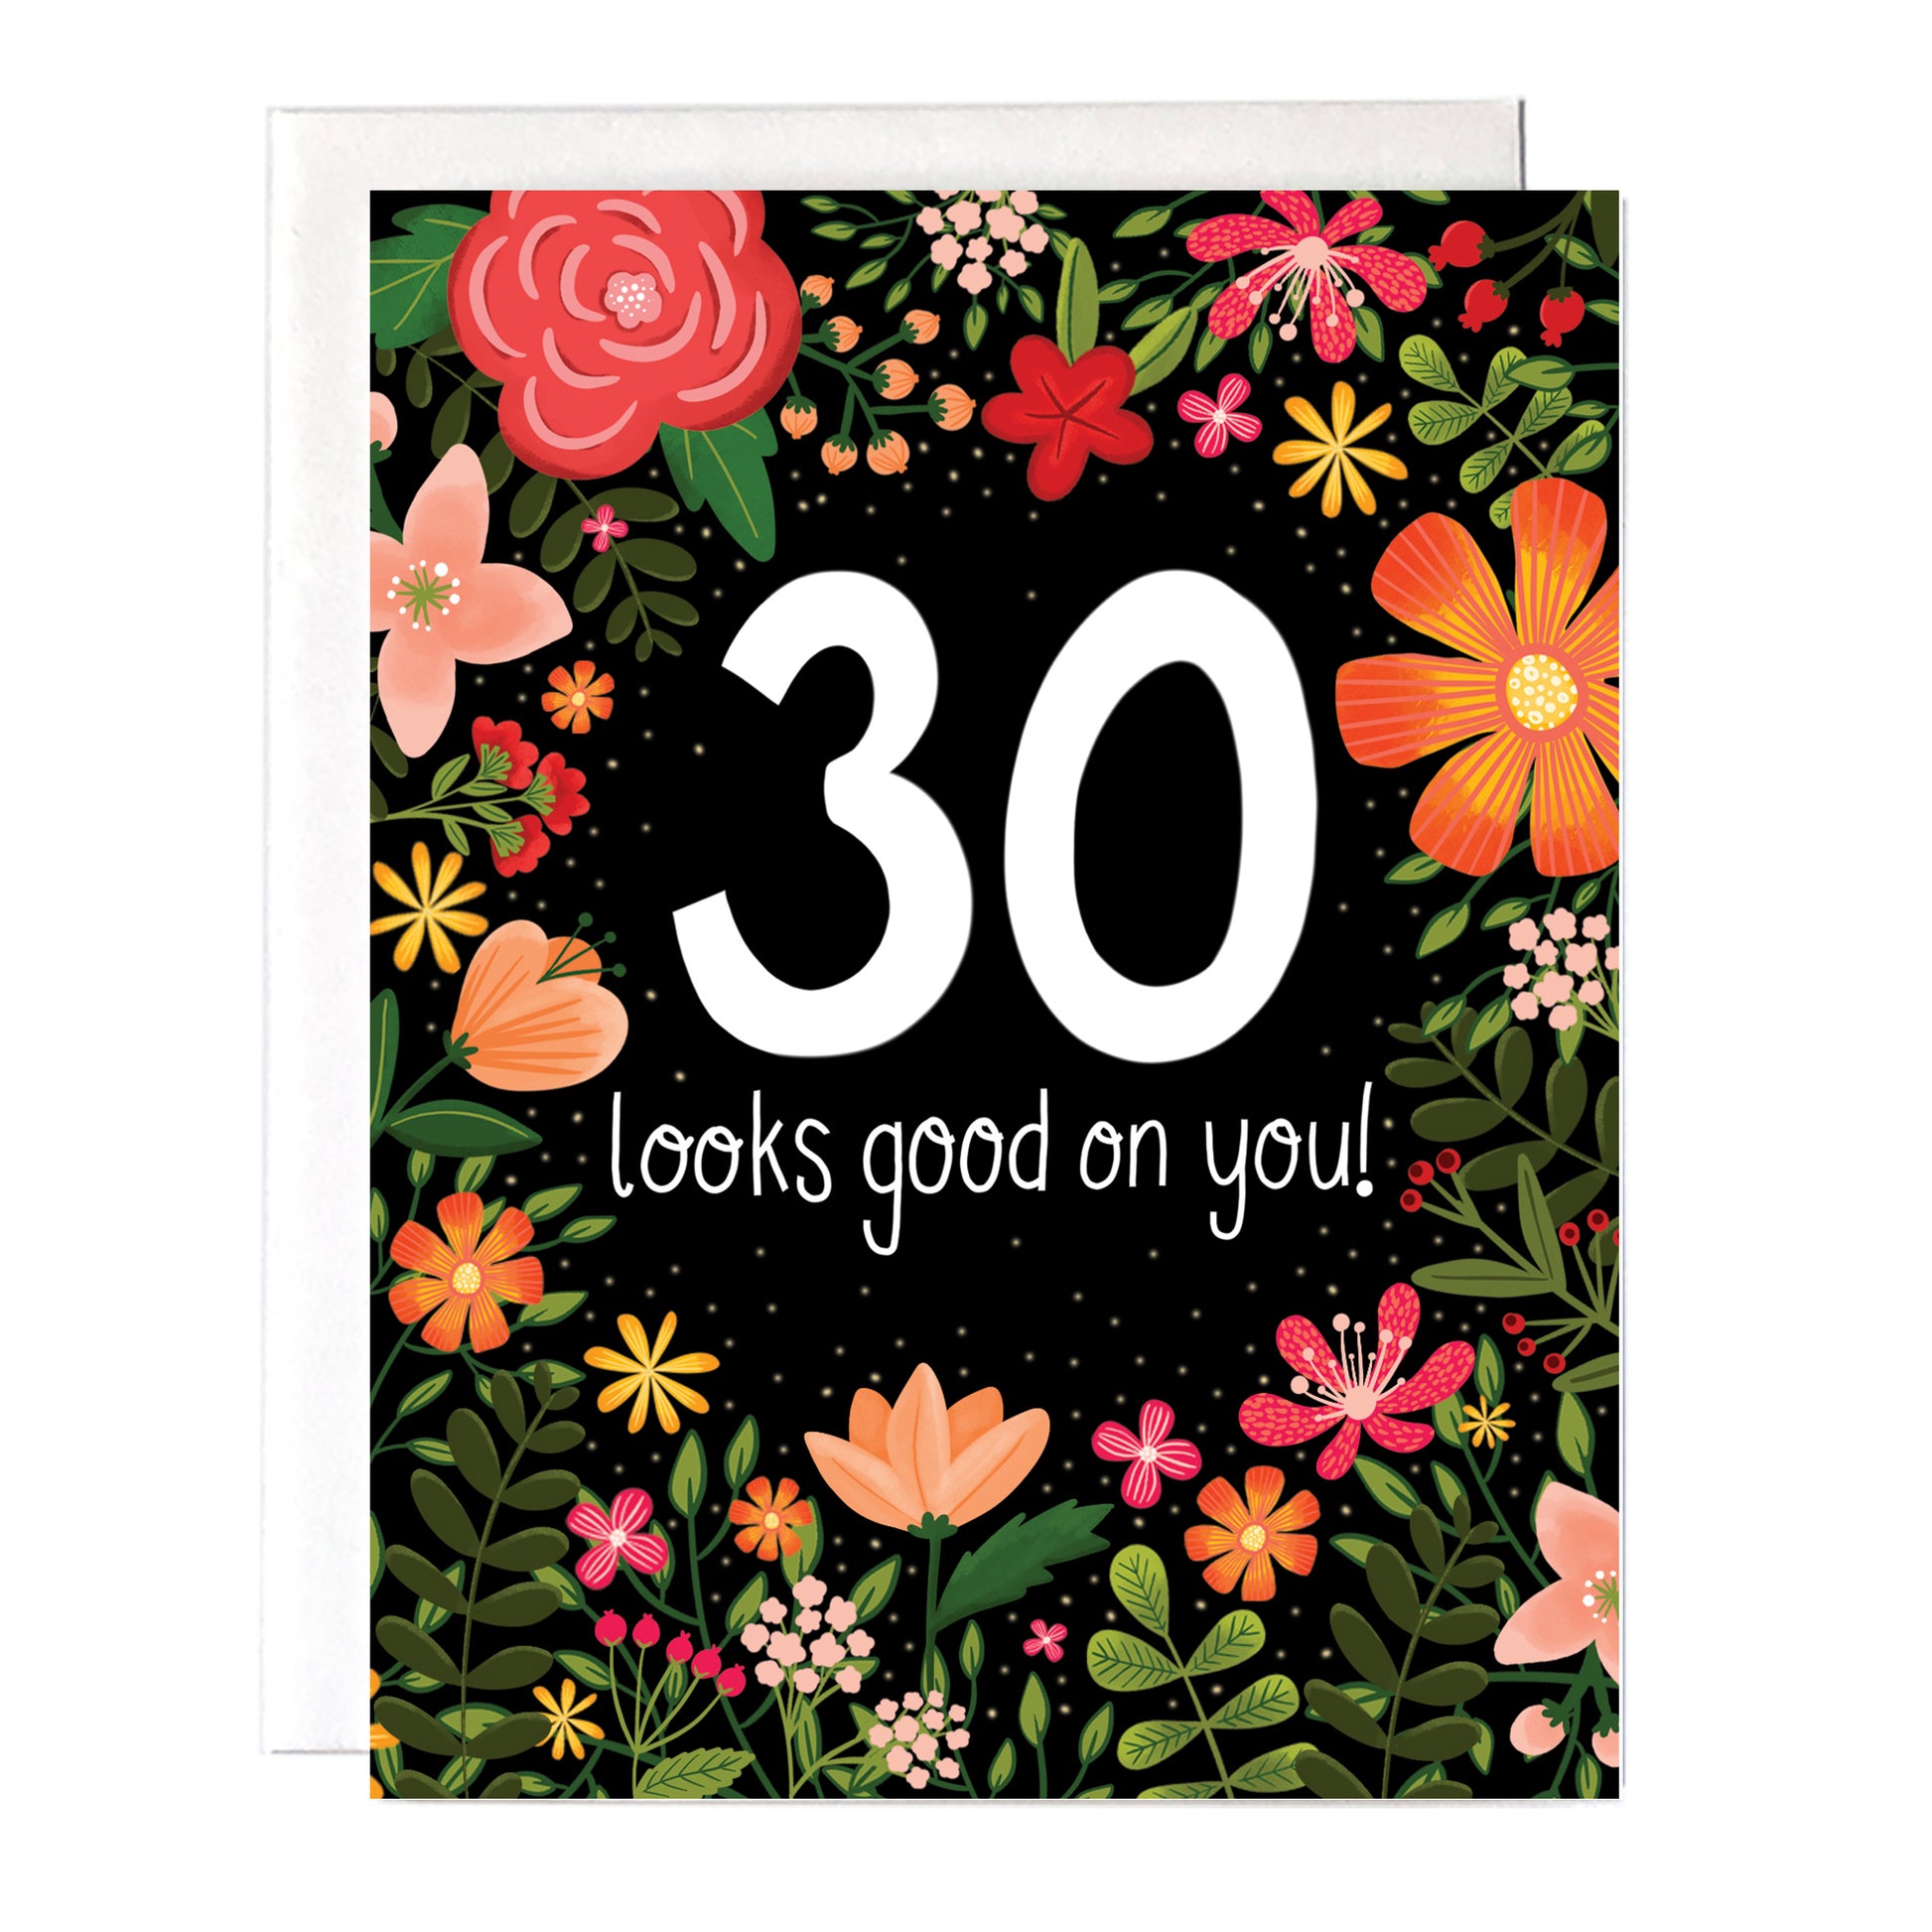 30 looks good on you 30th birthday card with flowers